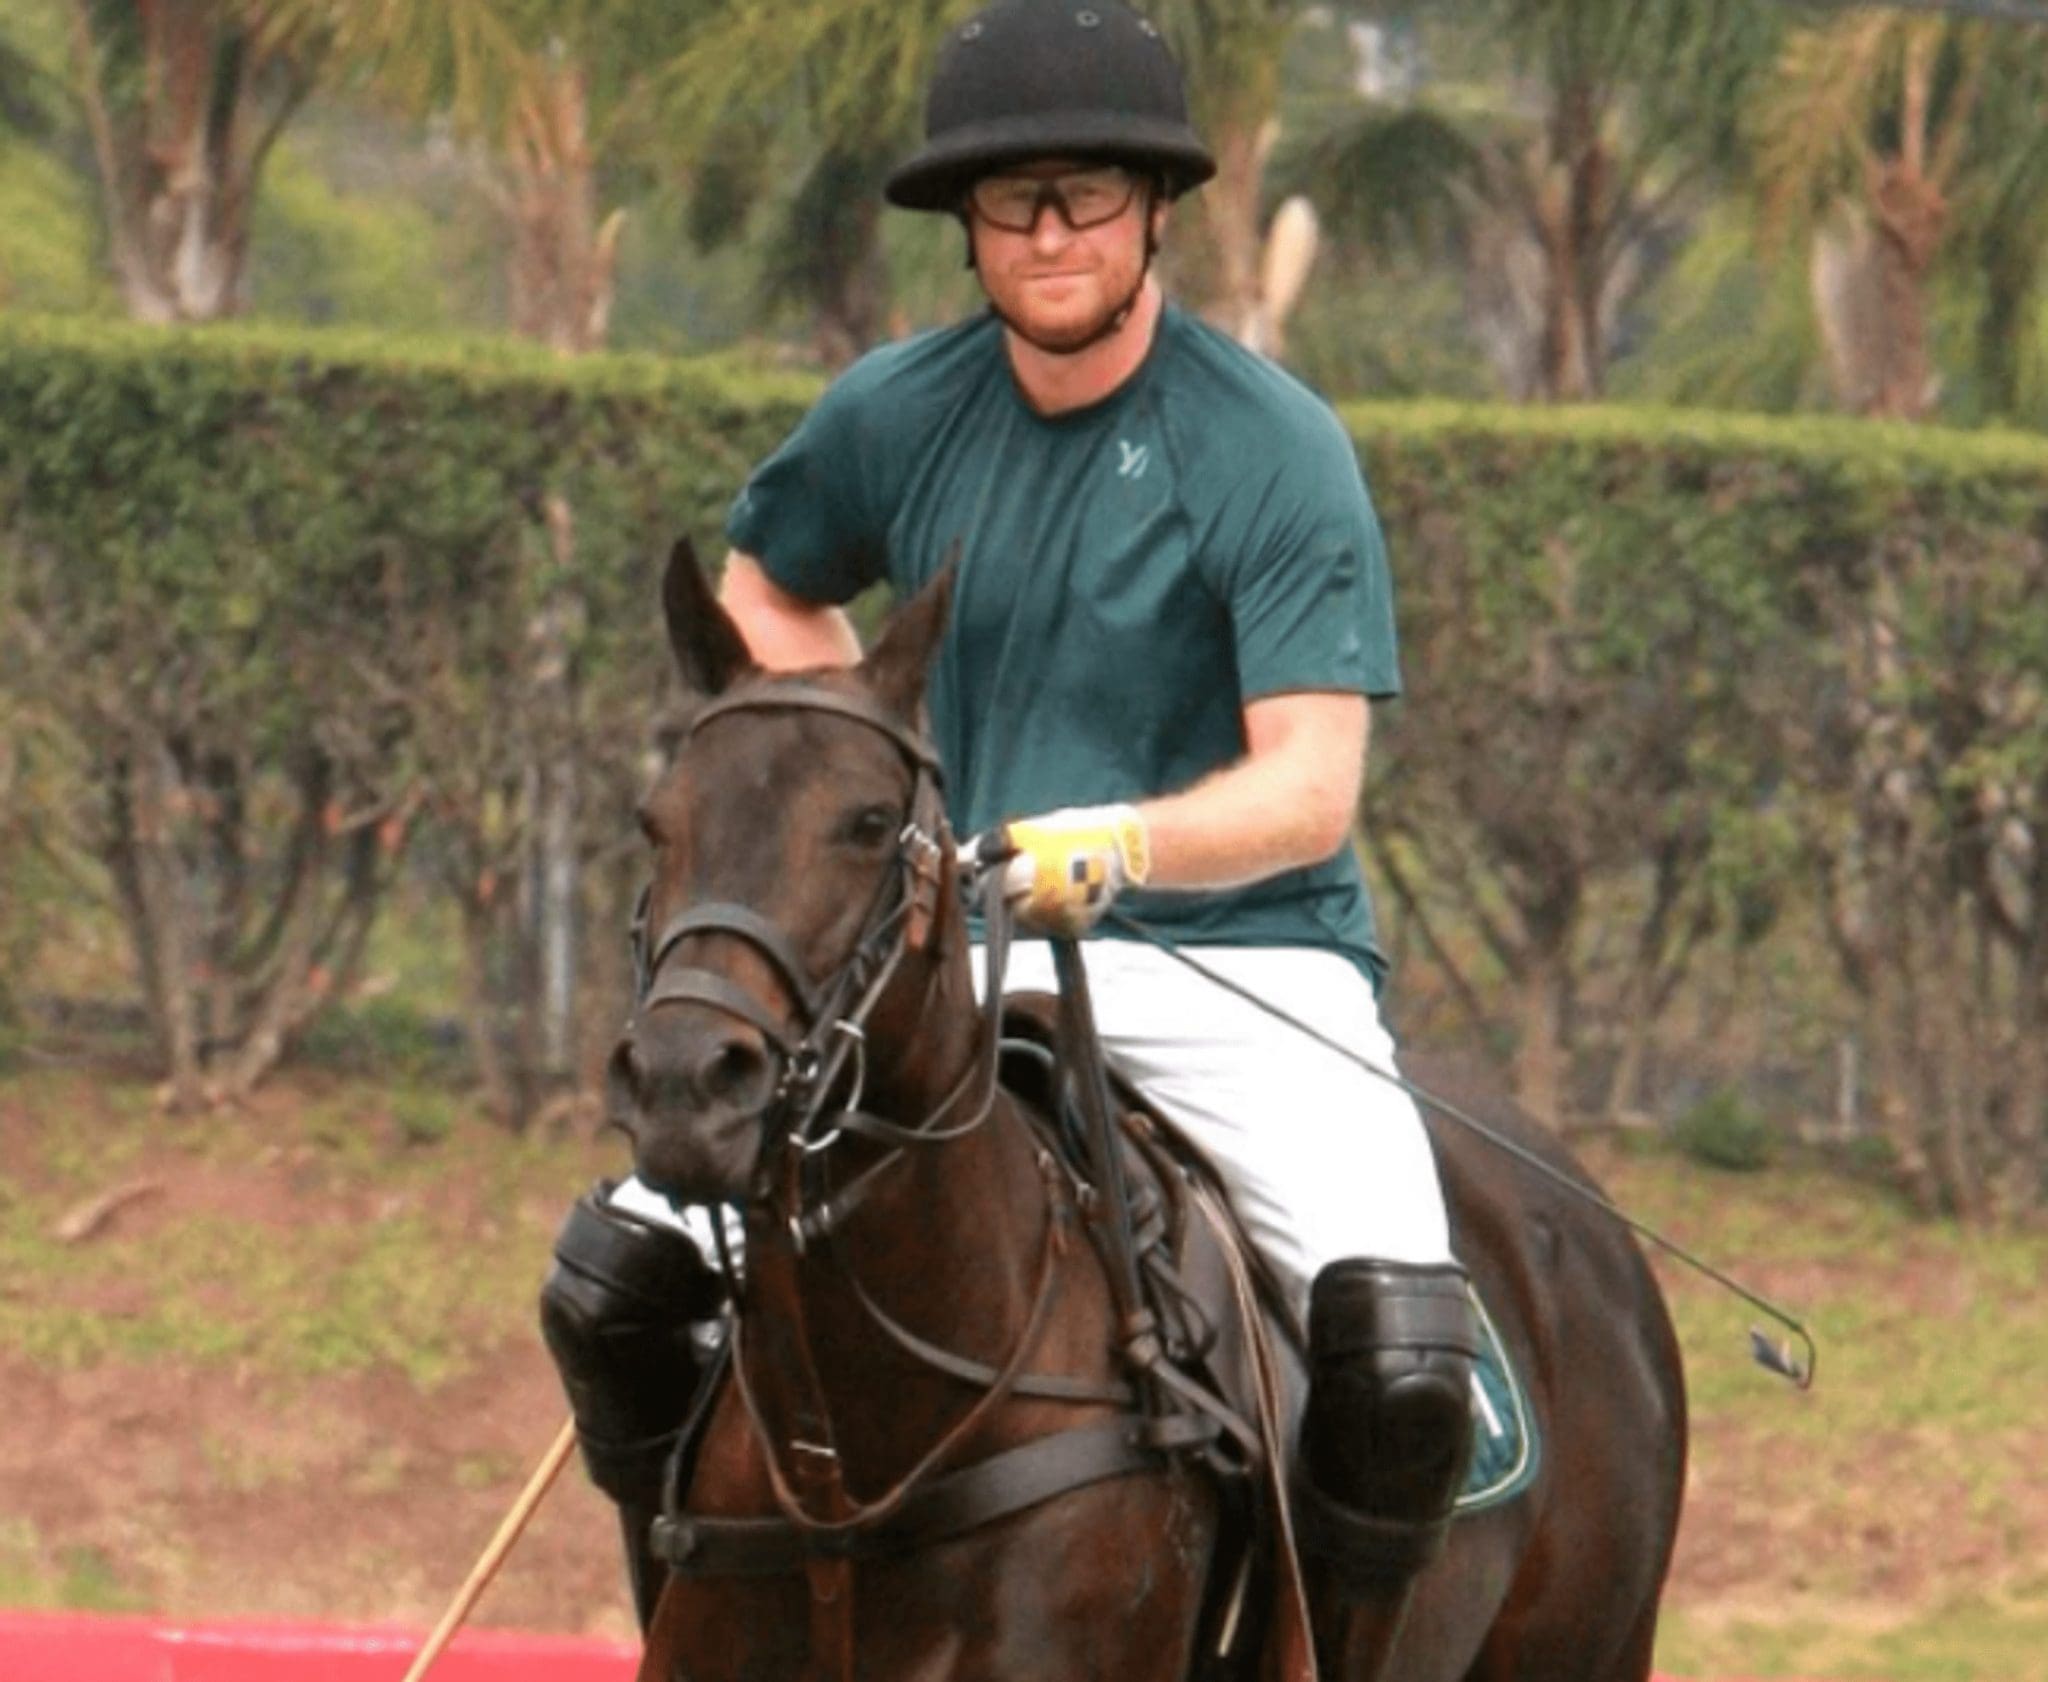 Prince Harry almost died in a fall from his horse during a polo match at a country club in Carpinteria